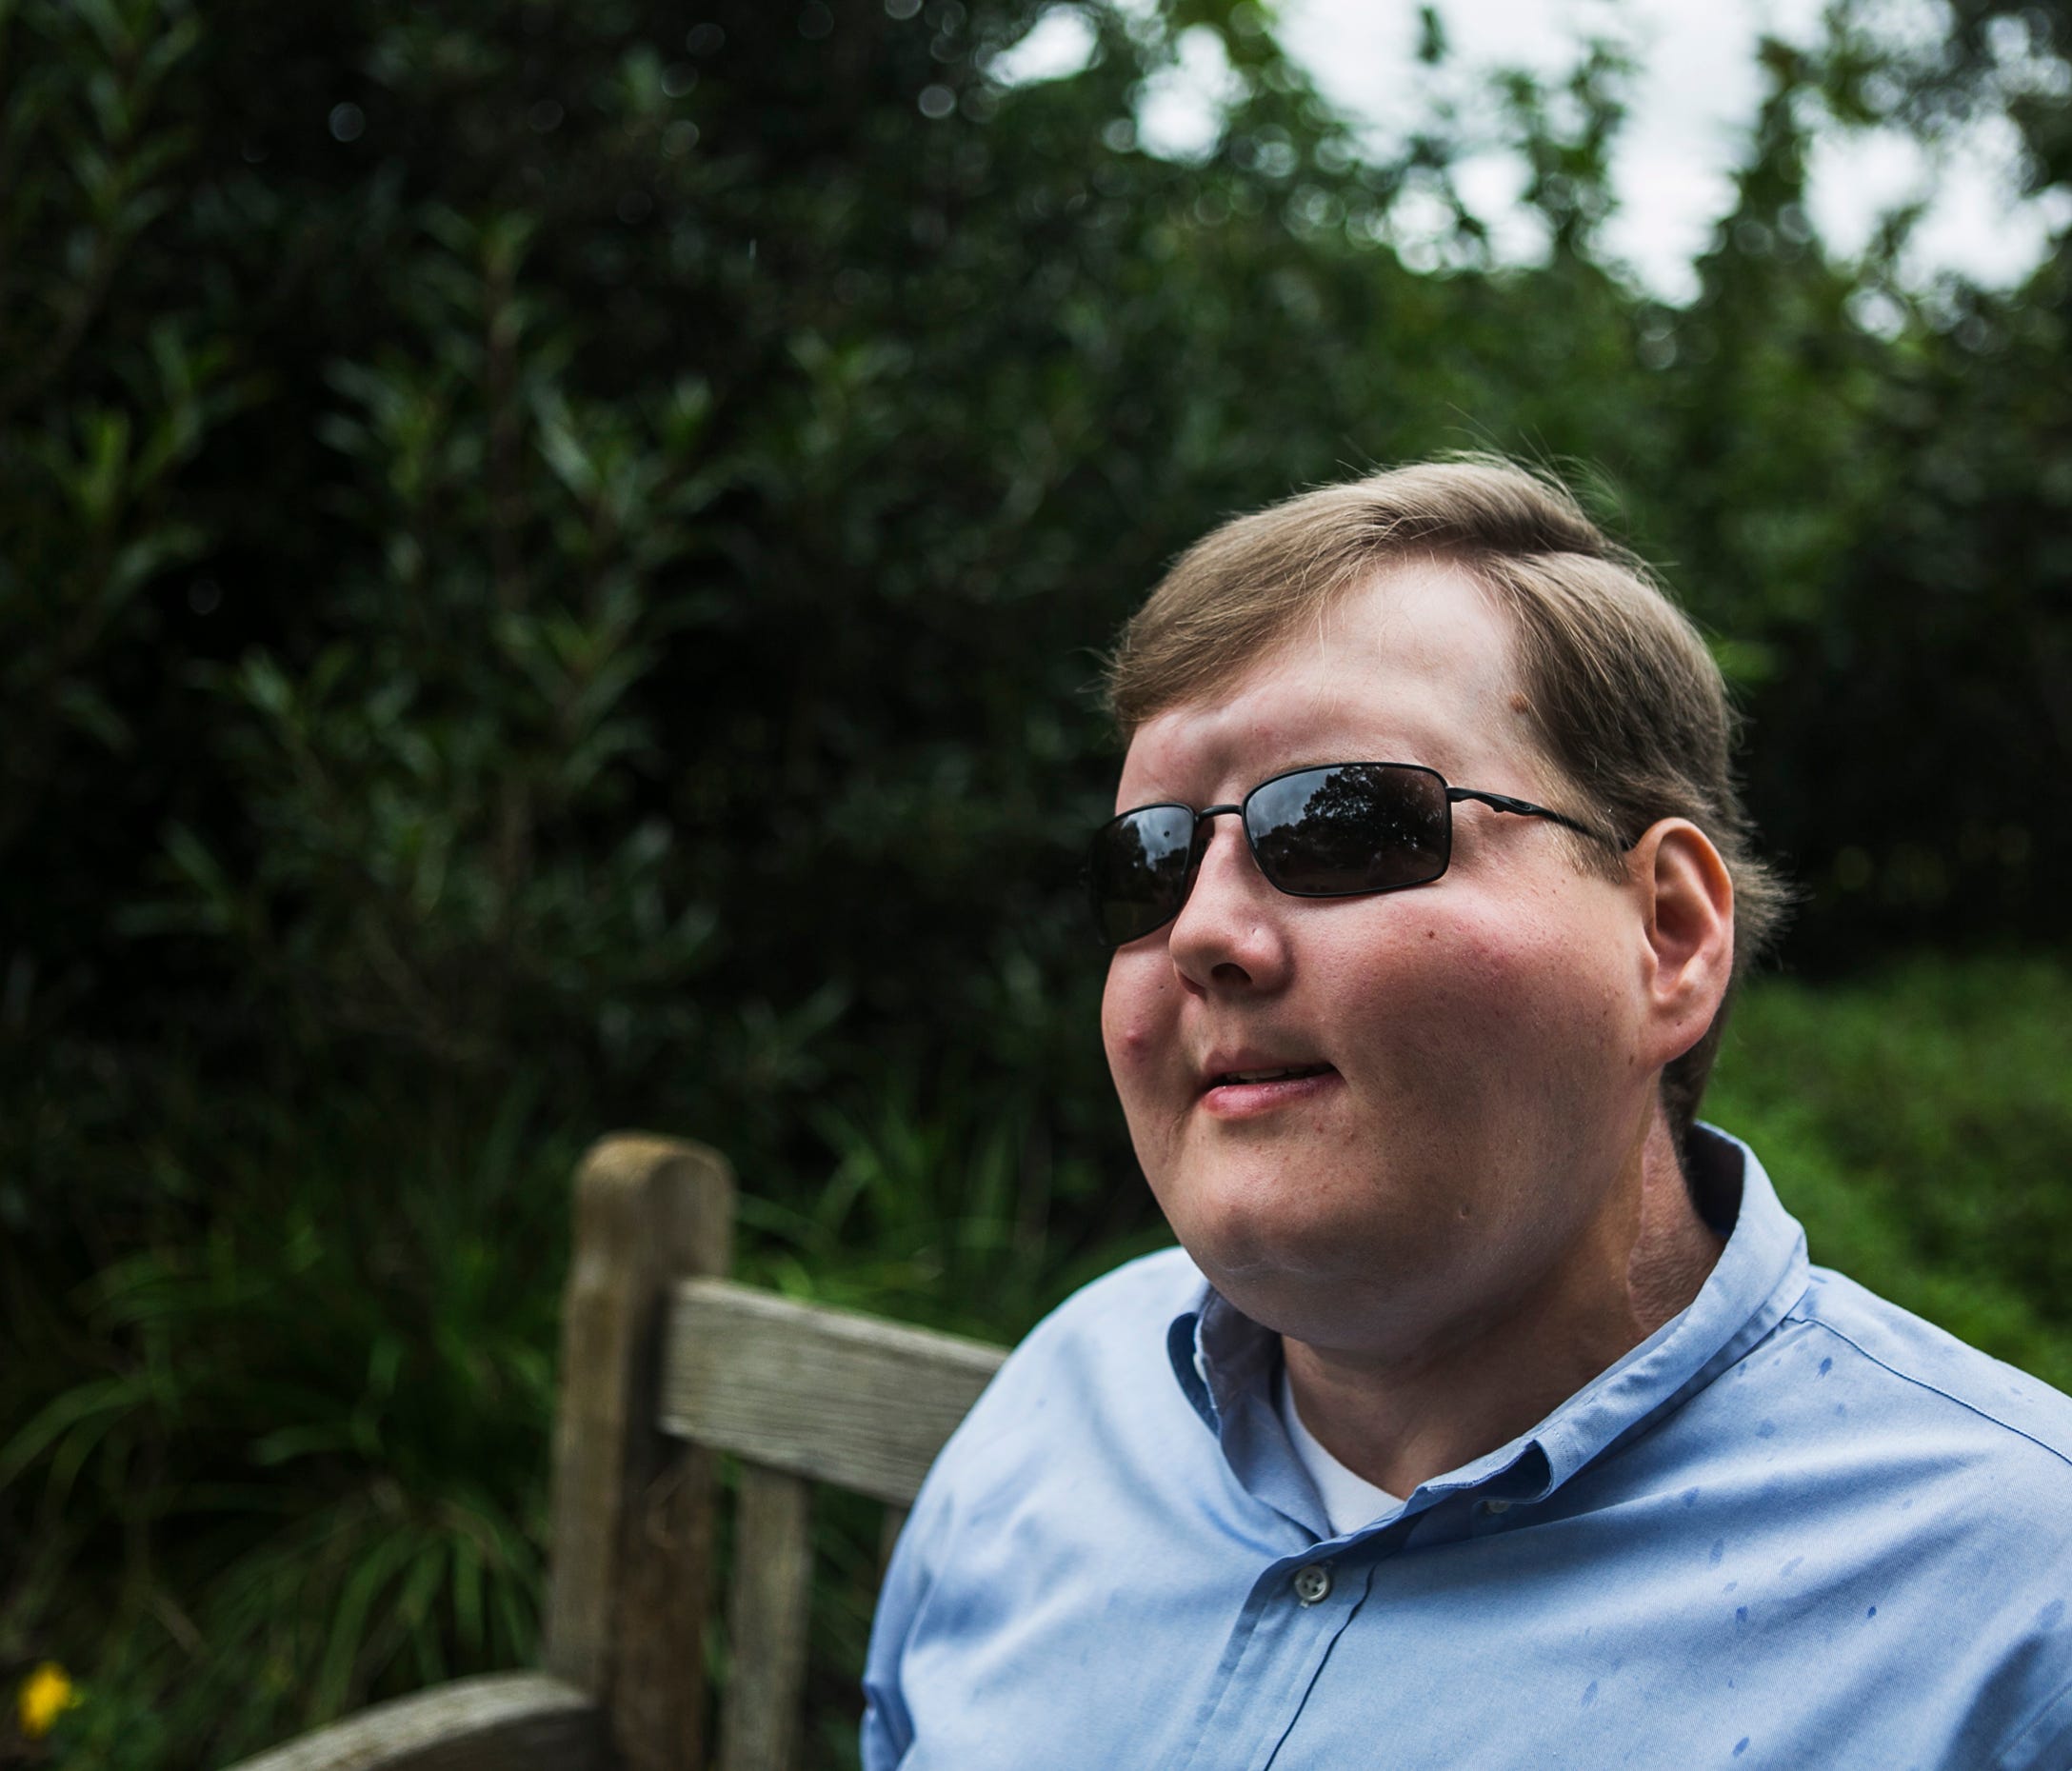 October 22, 2017 - Face transplant recipient Pat Hardison, 43, poses for a portrait prior to speaking at the Mid-South Transplant Foundation's annual 